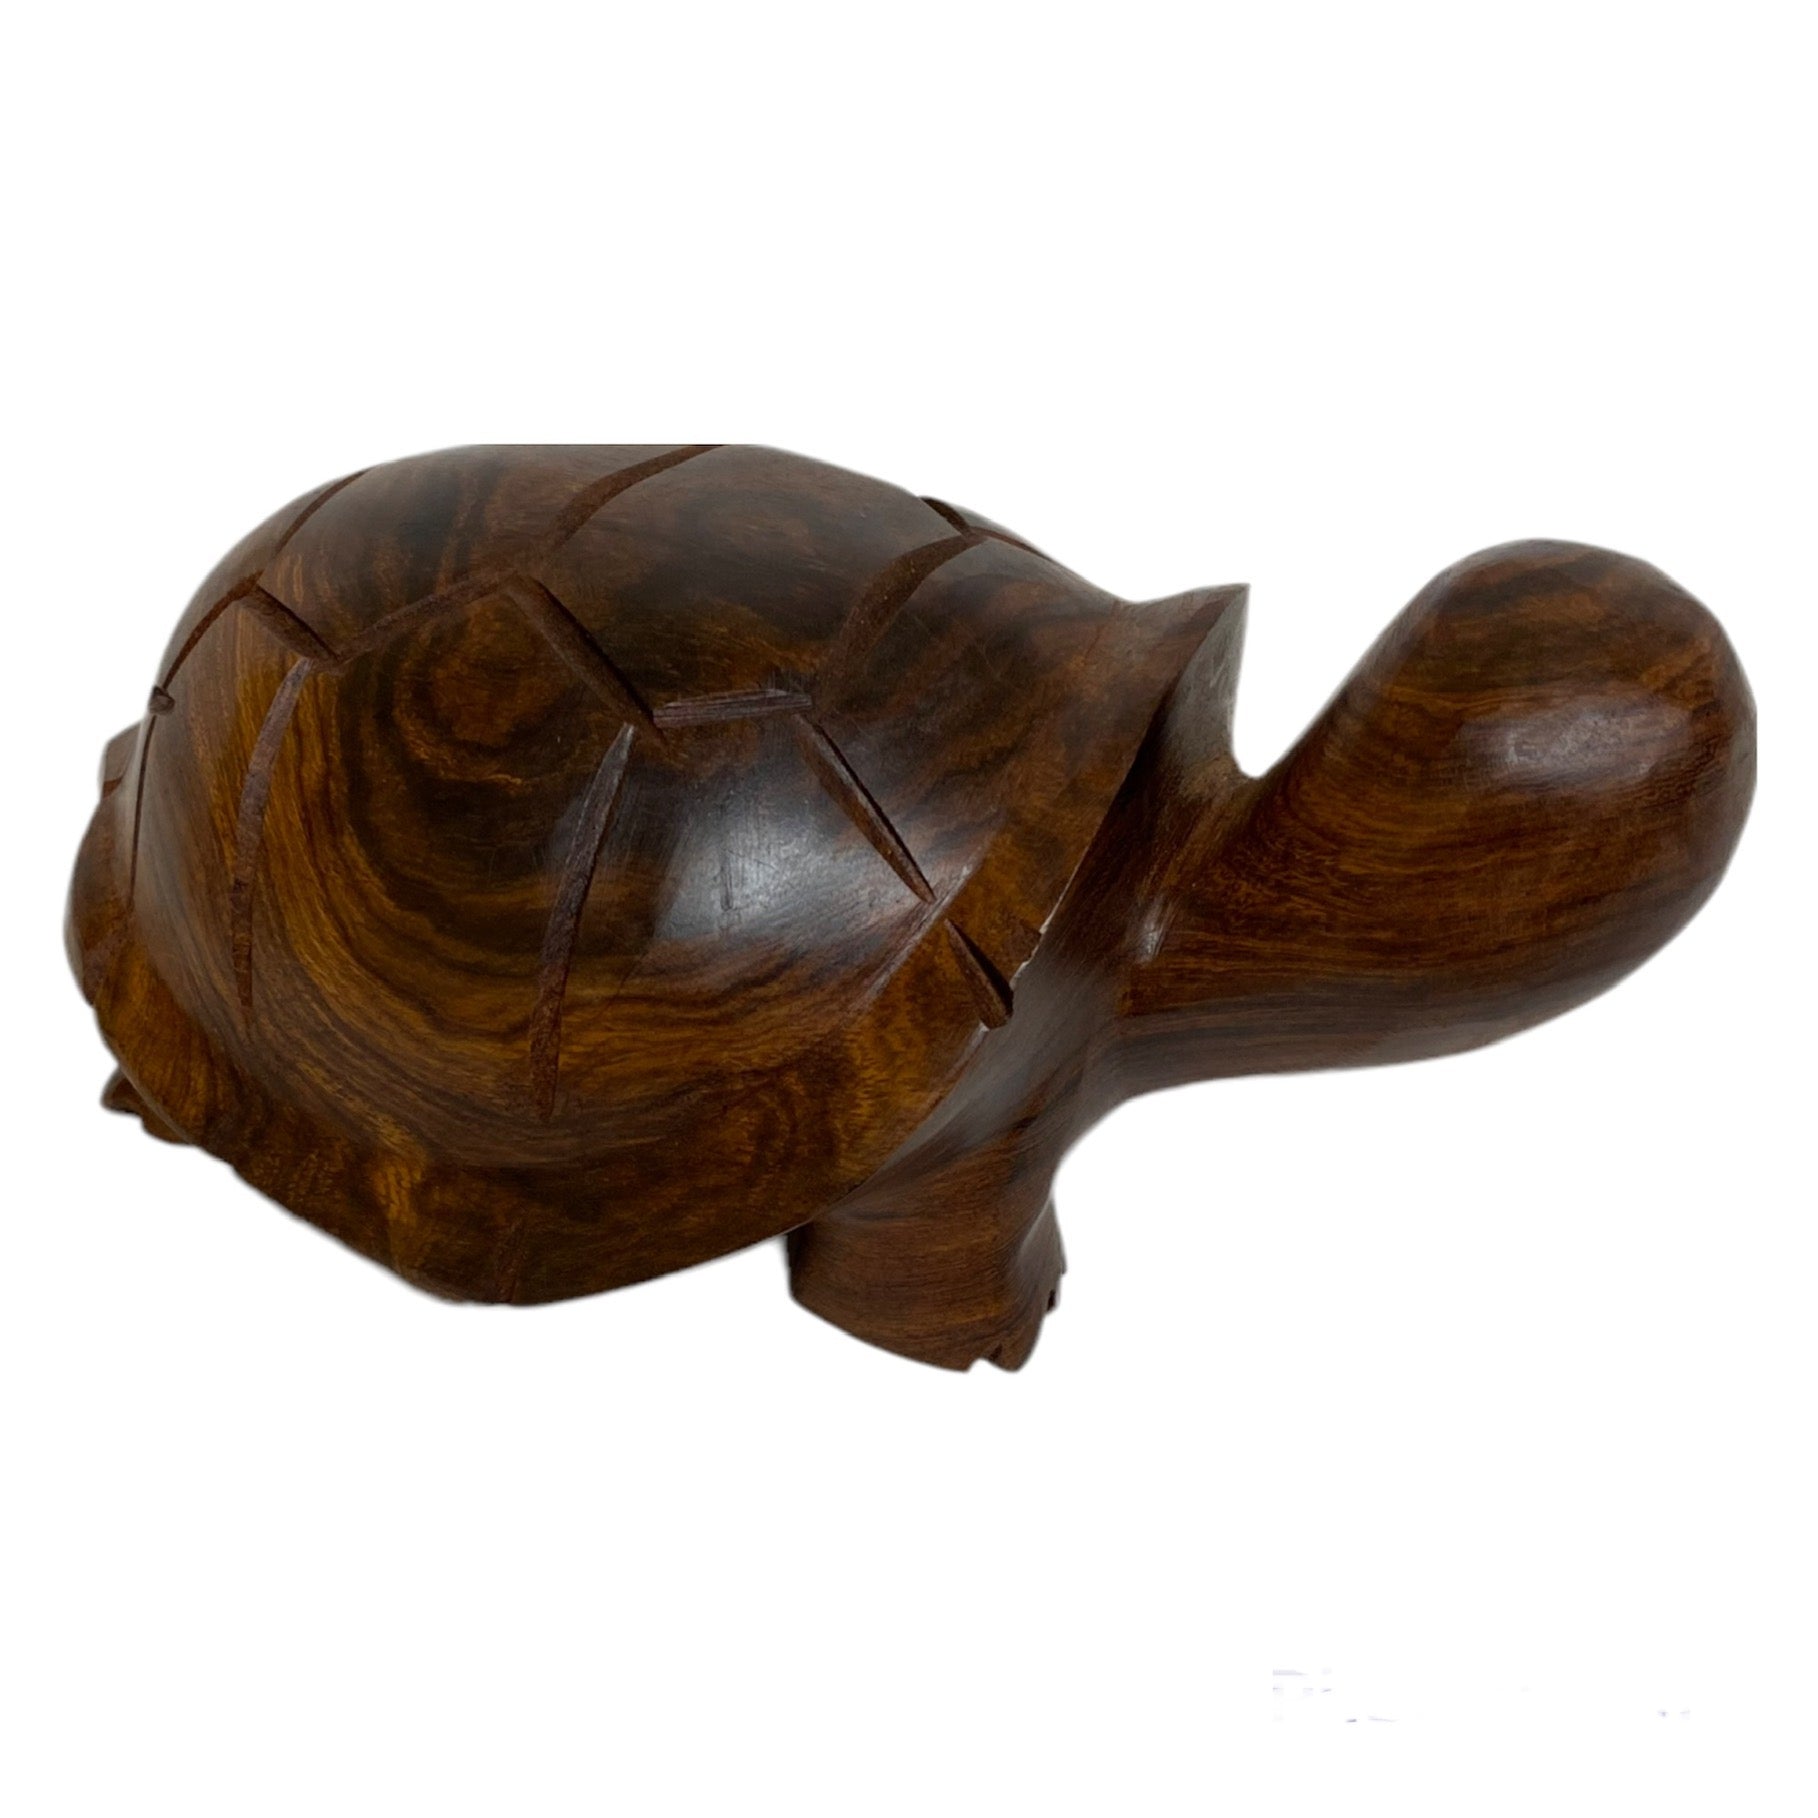 Ironwood Land Turtle made in Mexico Turtle Vintage ironwood hand carved  Desert Wood carved Turtle Wood C 6.5